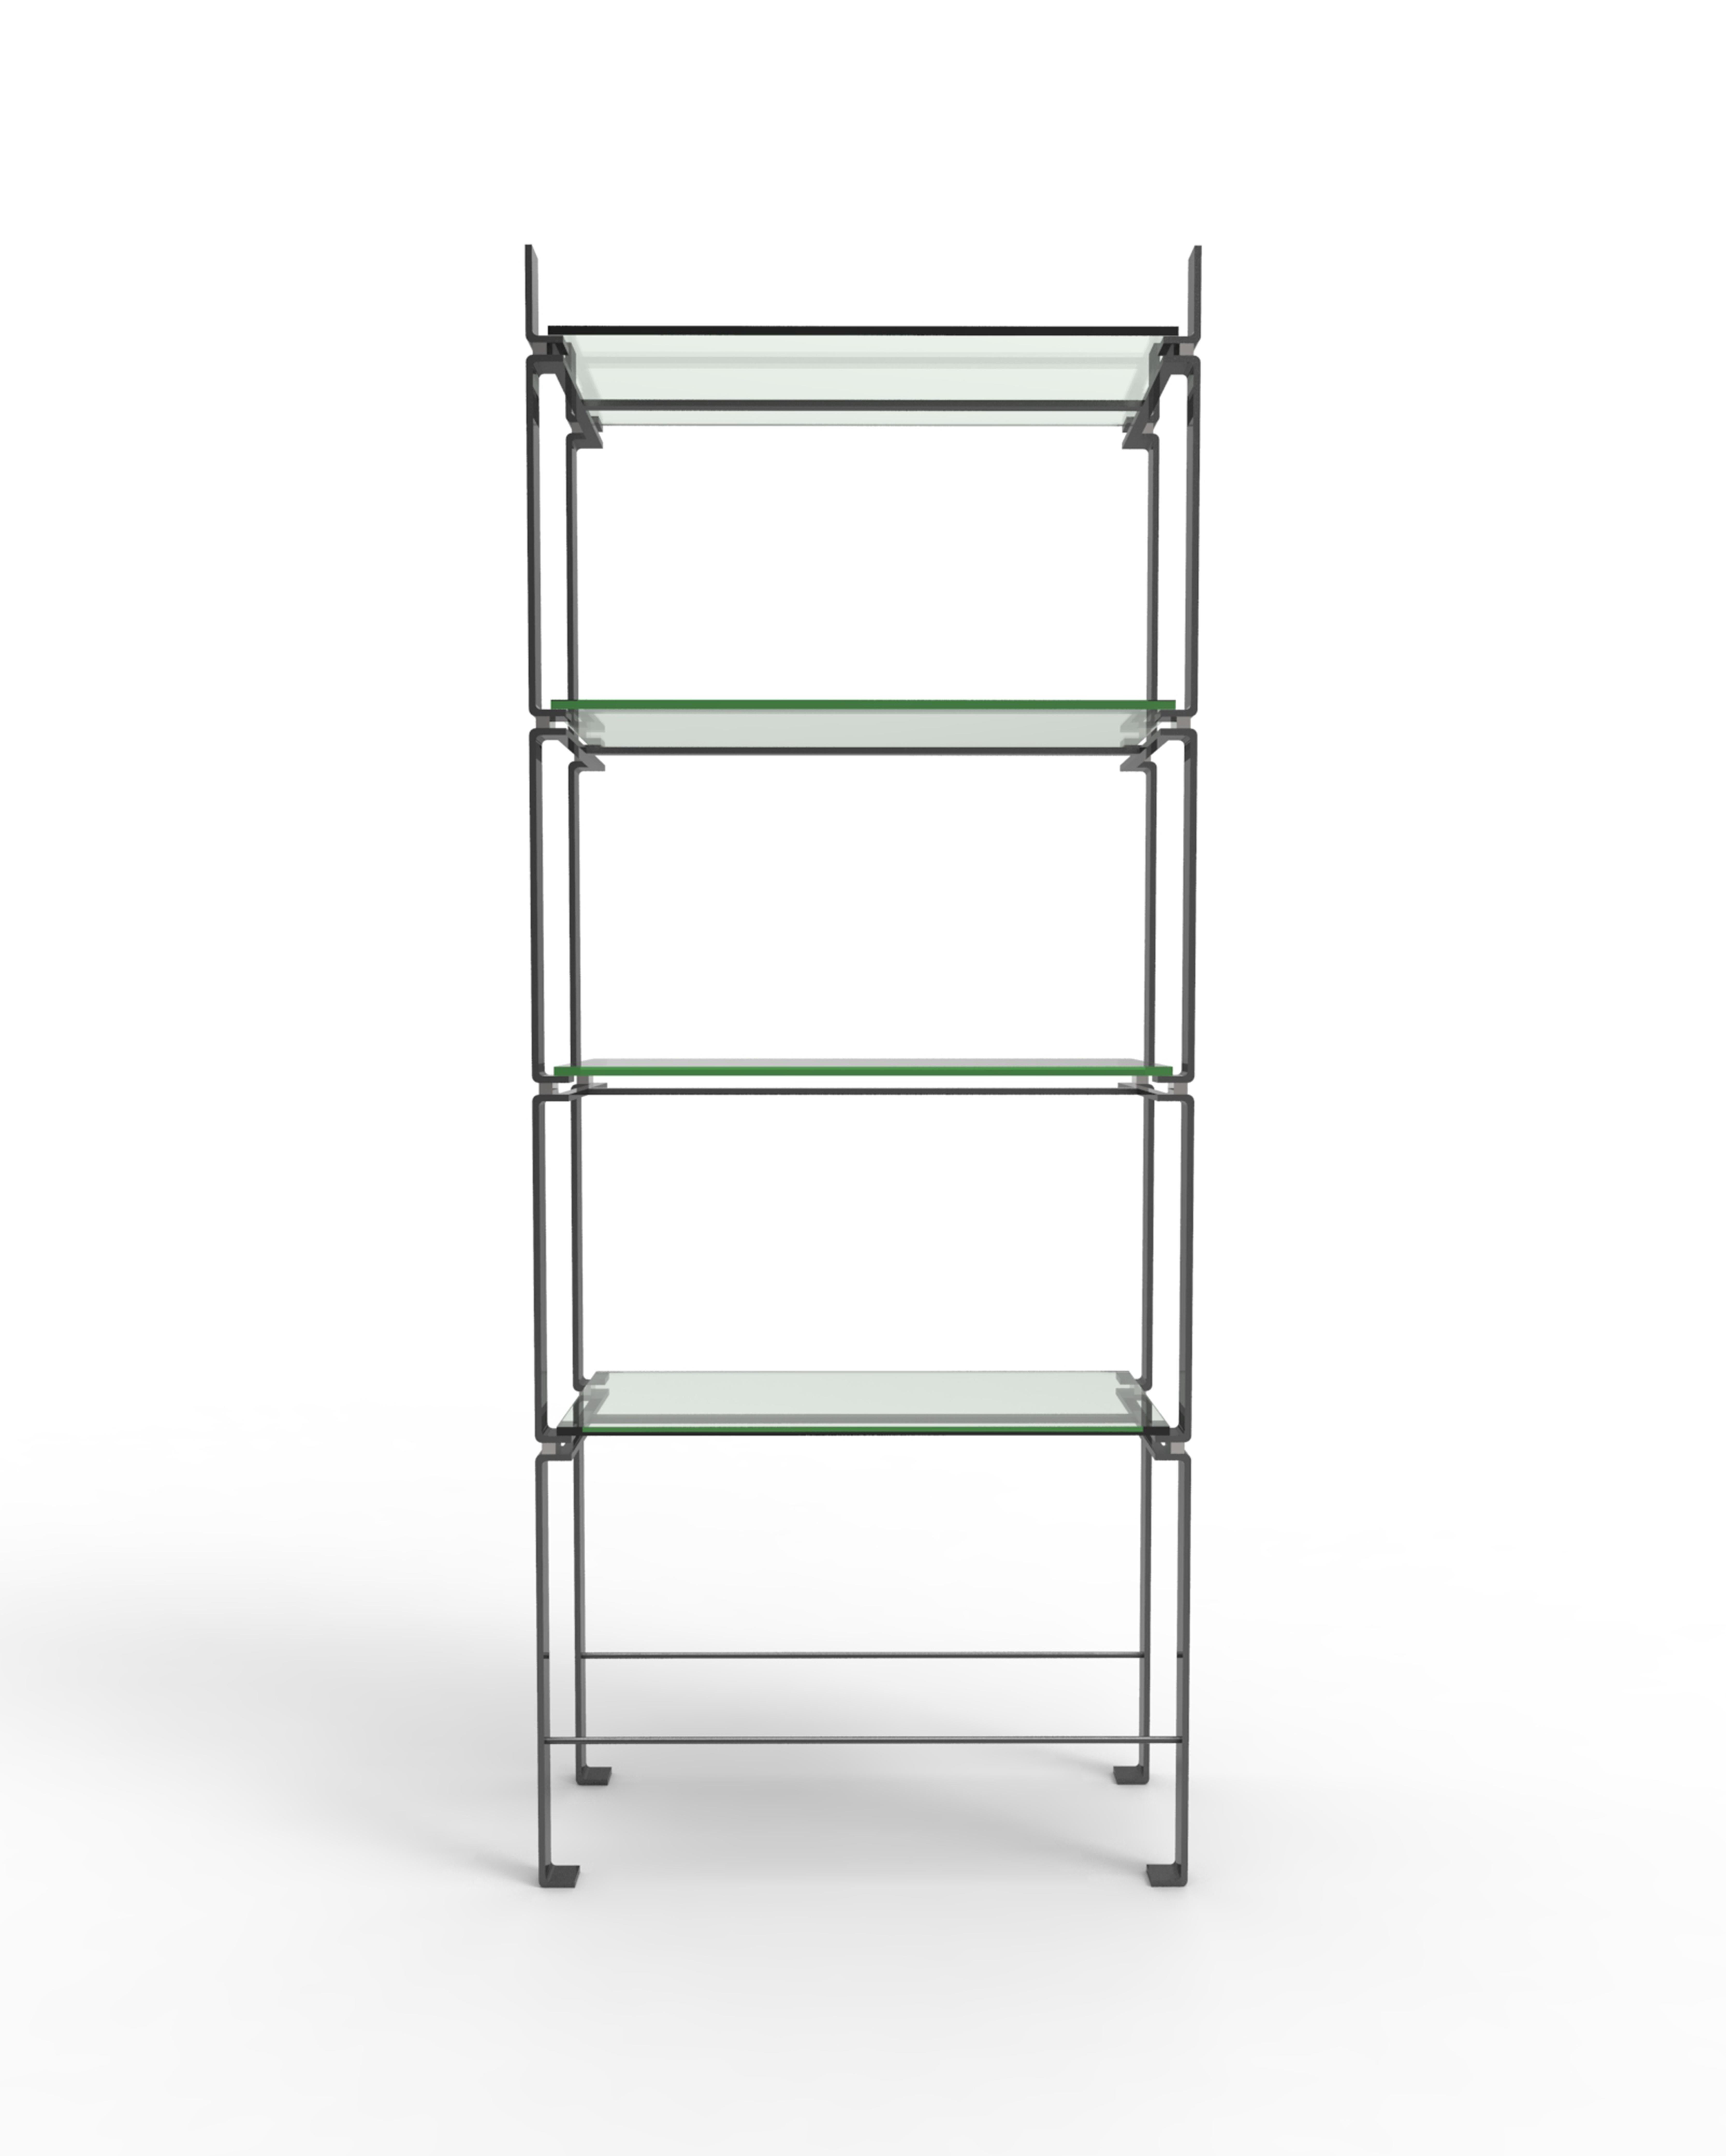 Etagere shelves by Gentner Design
Dimensions: D 35.5 x W 91 x H 238 cm
Materials: stainless steel, glass
Available in other sizes.

Visually delicate, the contrasting materials of polished stainless steel and glass give the pieces its